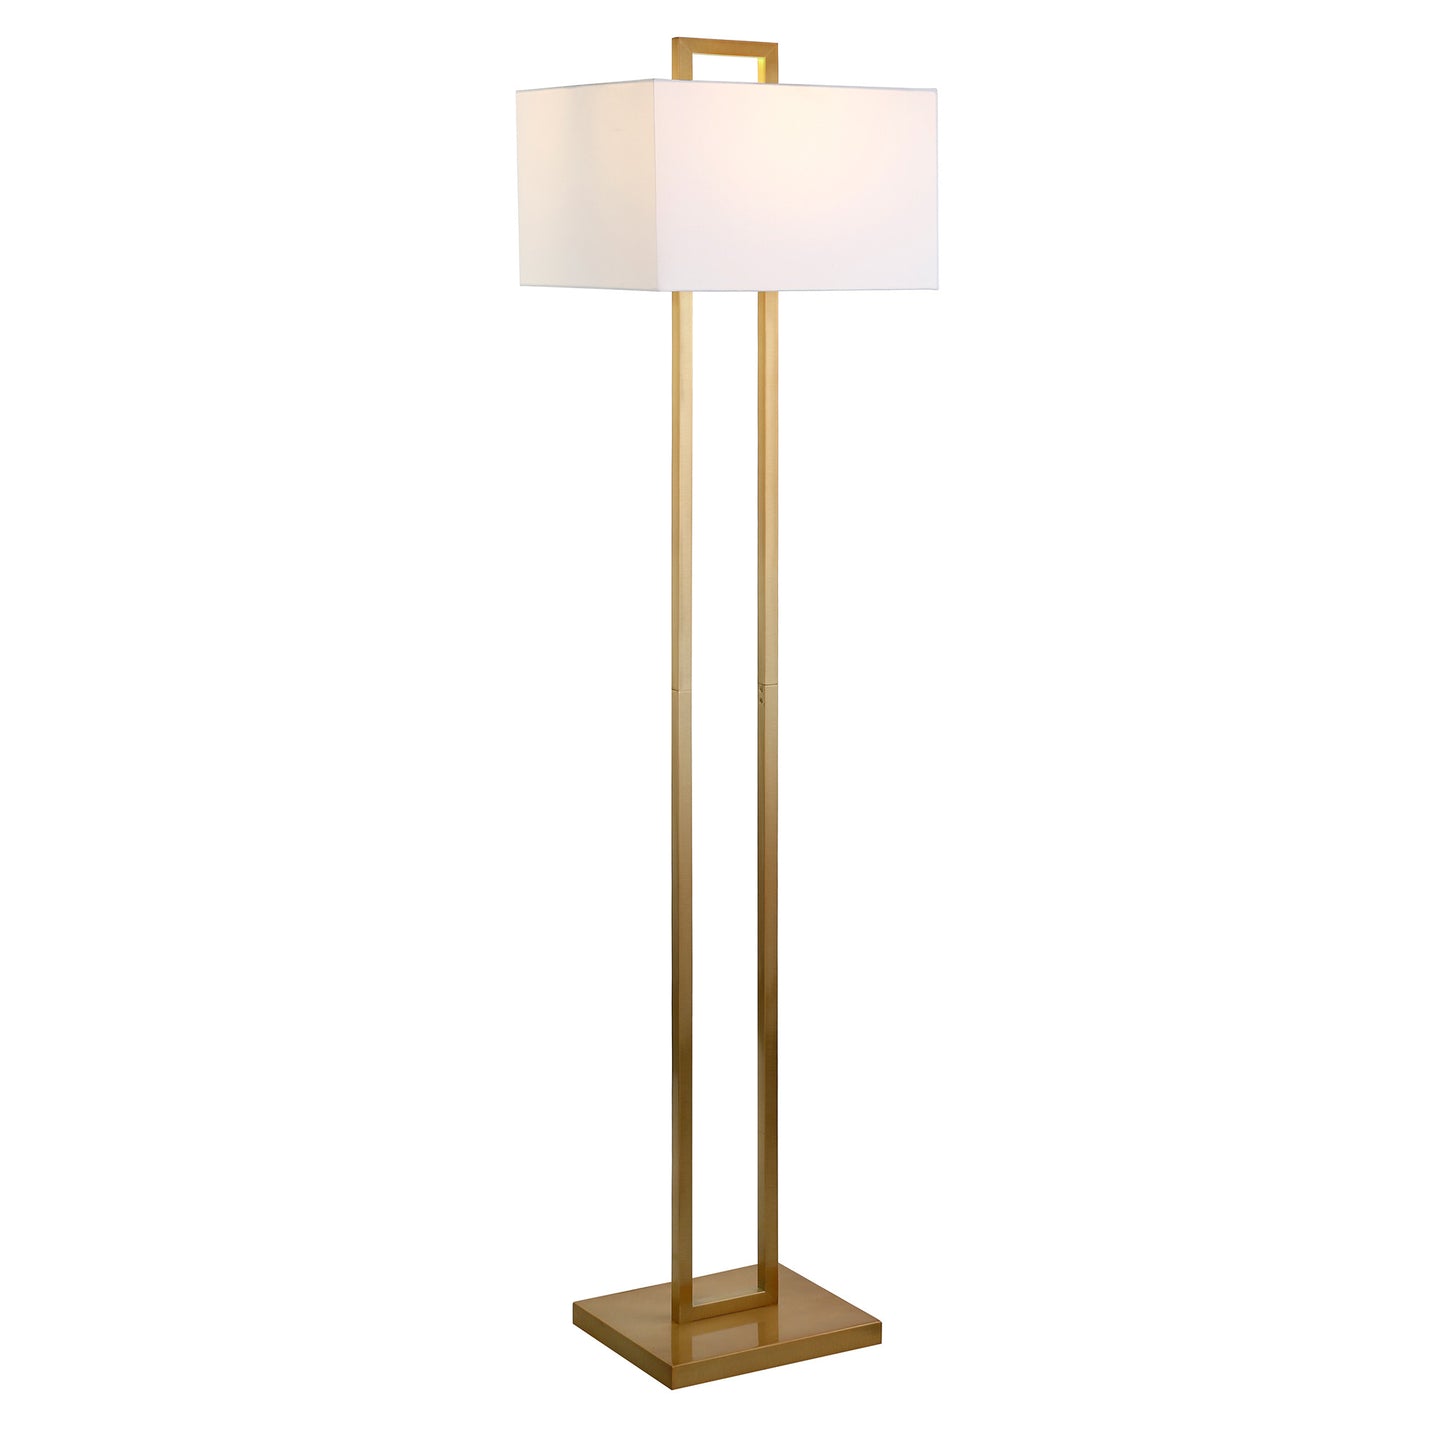 68" Brass Traditional Shaped Floor Lamp With White Frosted Glass Rectangular Shade